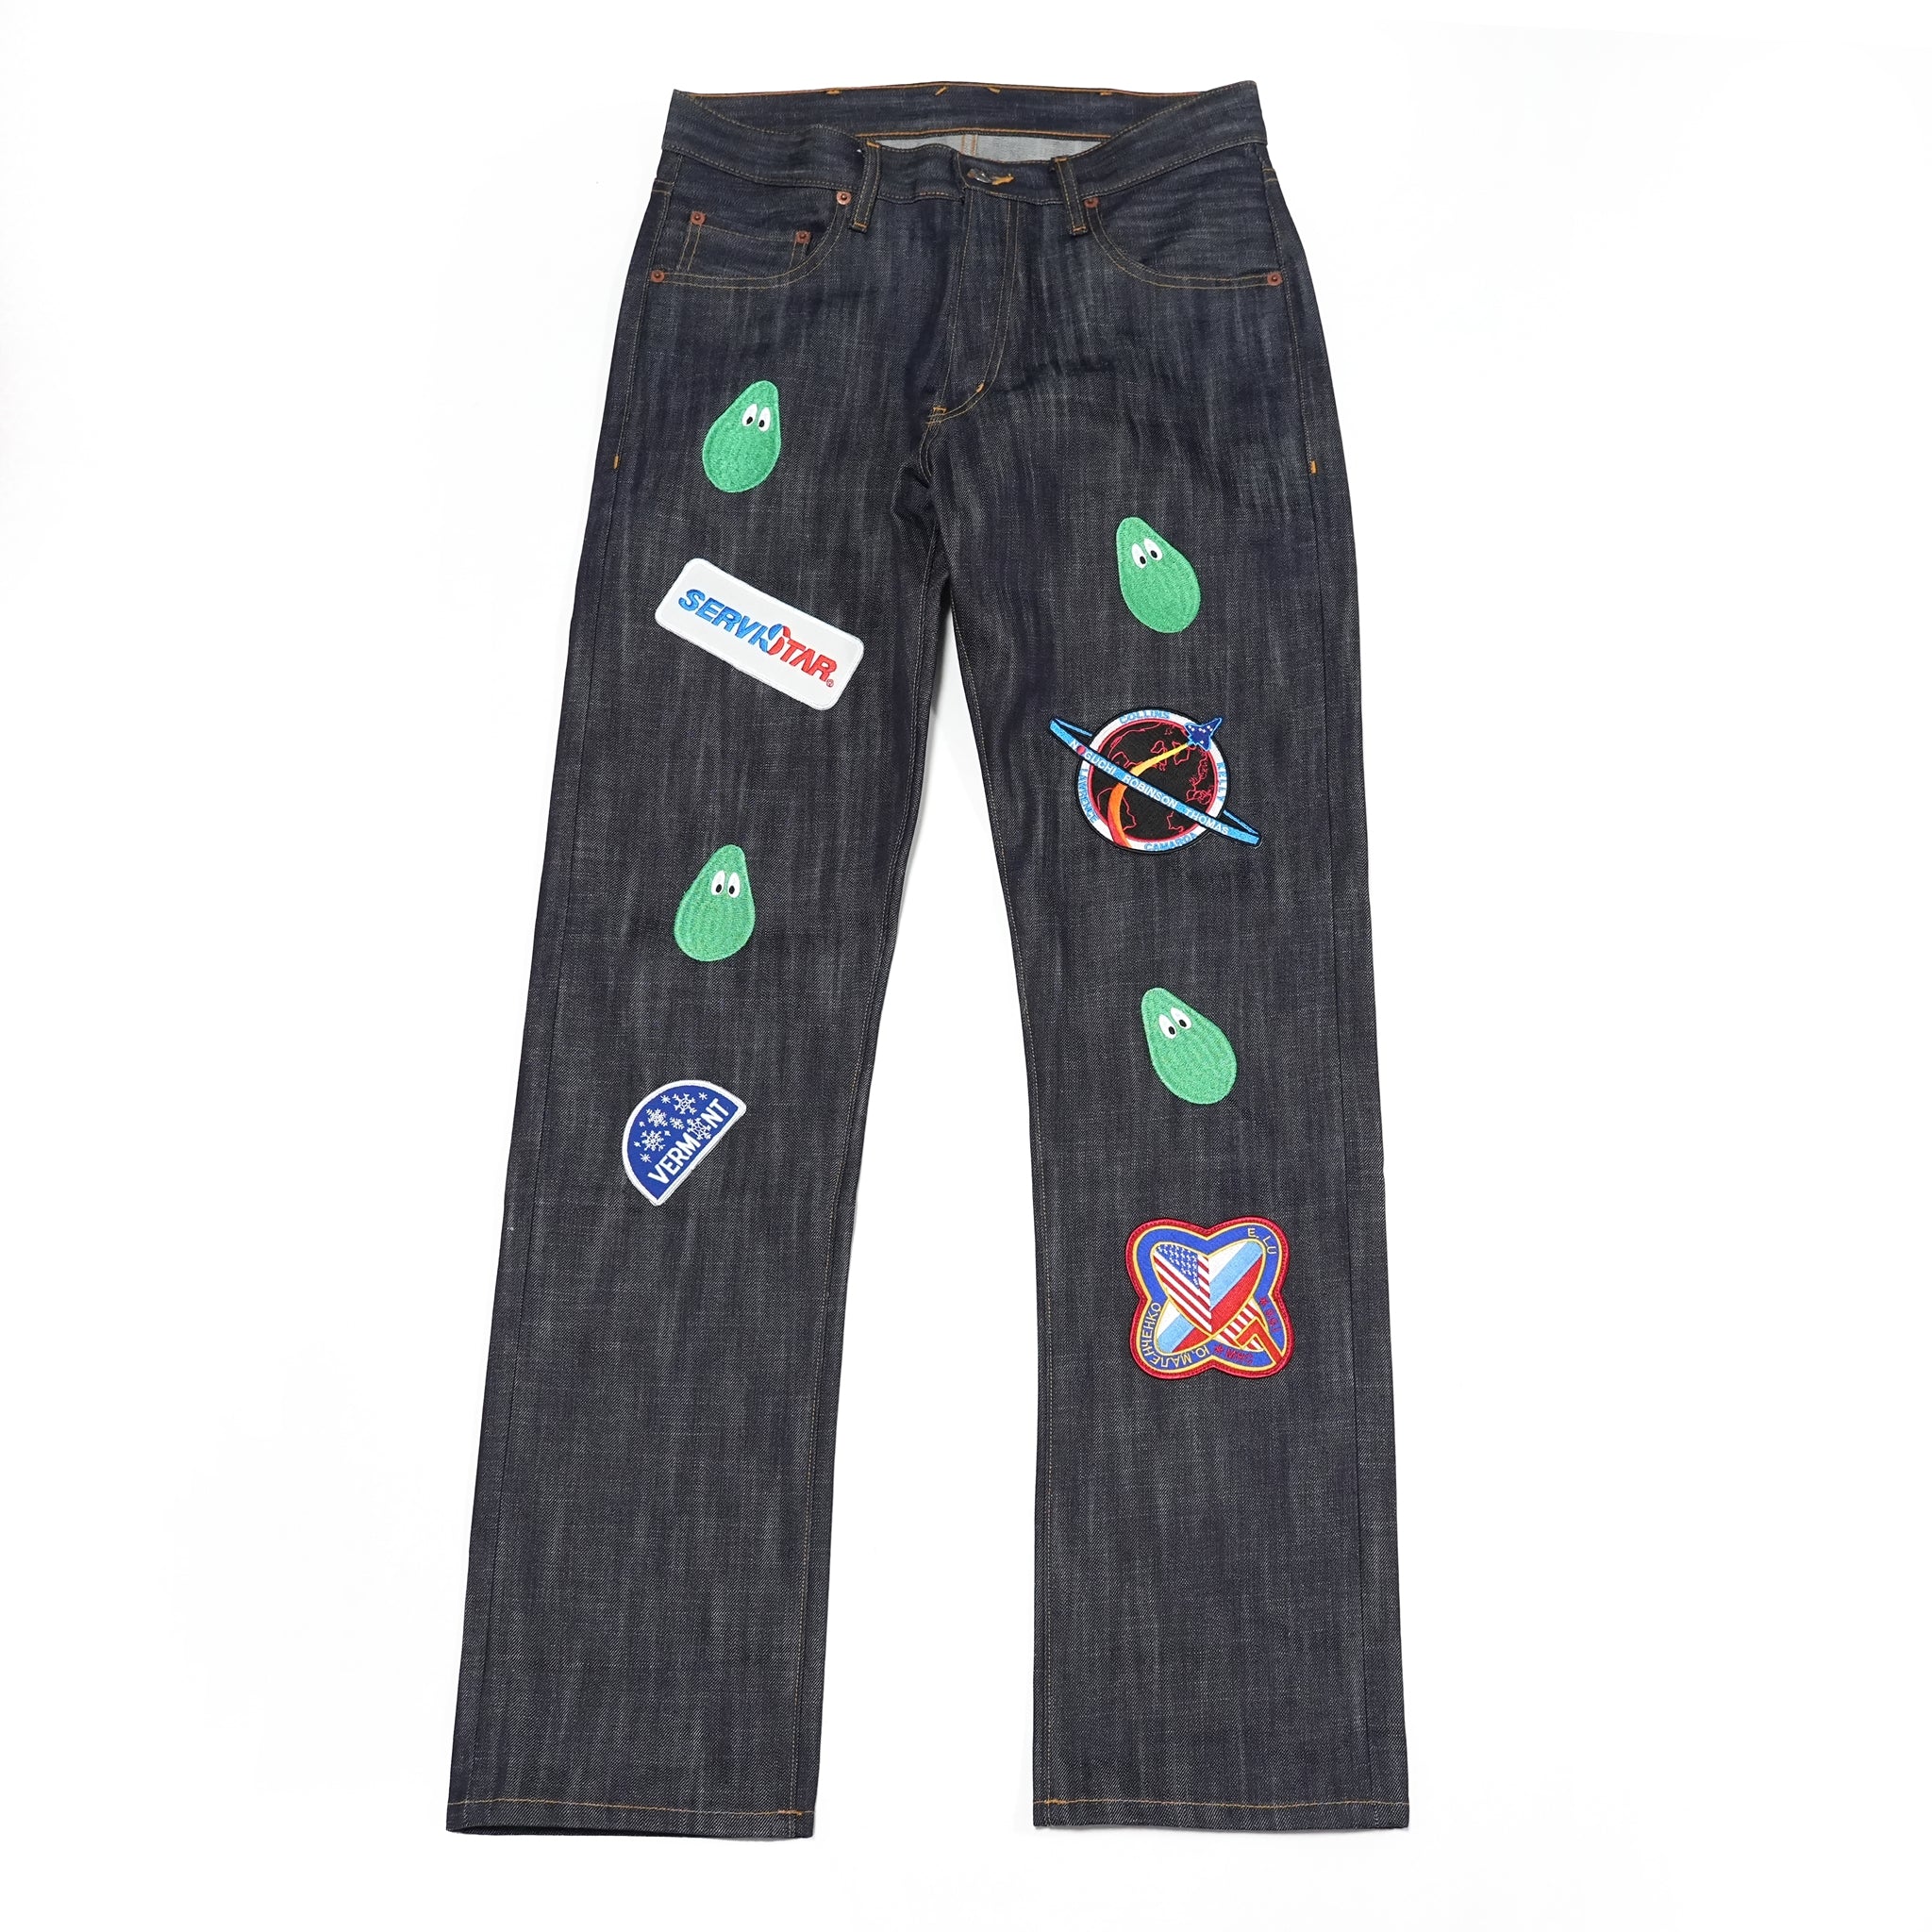 No:M31304 | Name:Monitaly Xx Jeans W/ Avocado Embroidery And Patches |